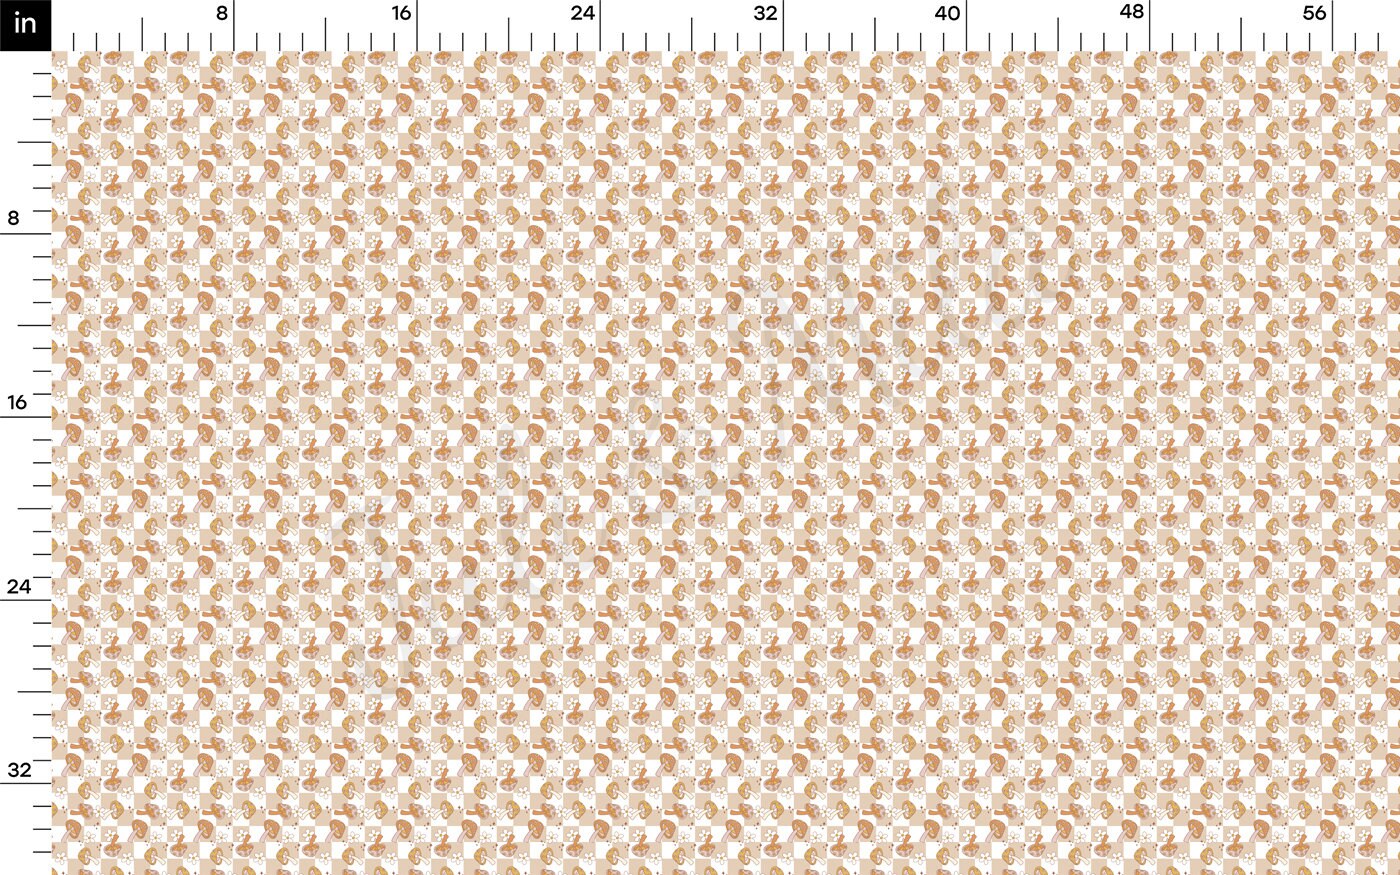 Liverpool Bullet Textured Fabric by the yard 4Way Stretch Solid Strip Thick Knit Jersey Liverpool Fabric AA2045